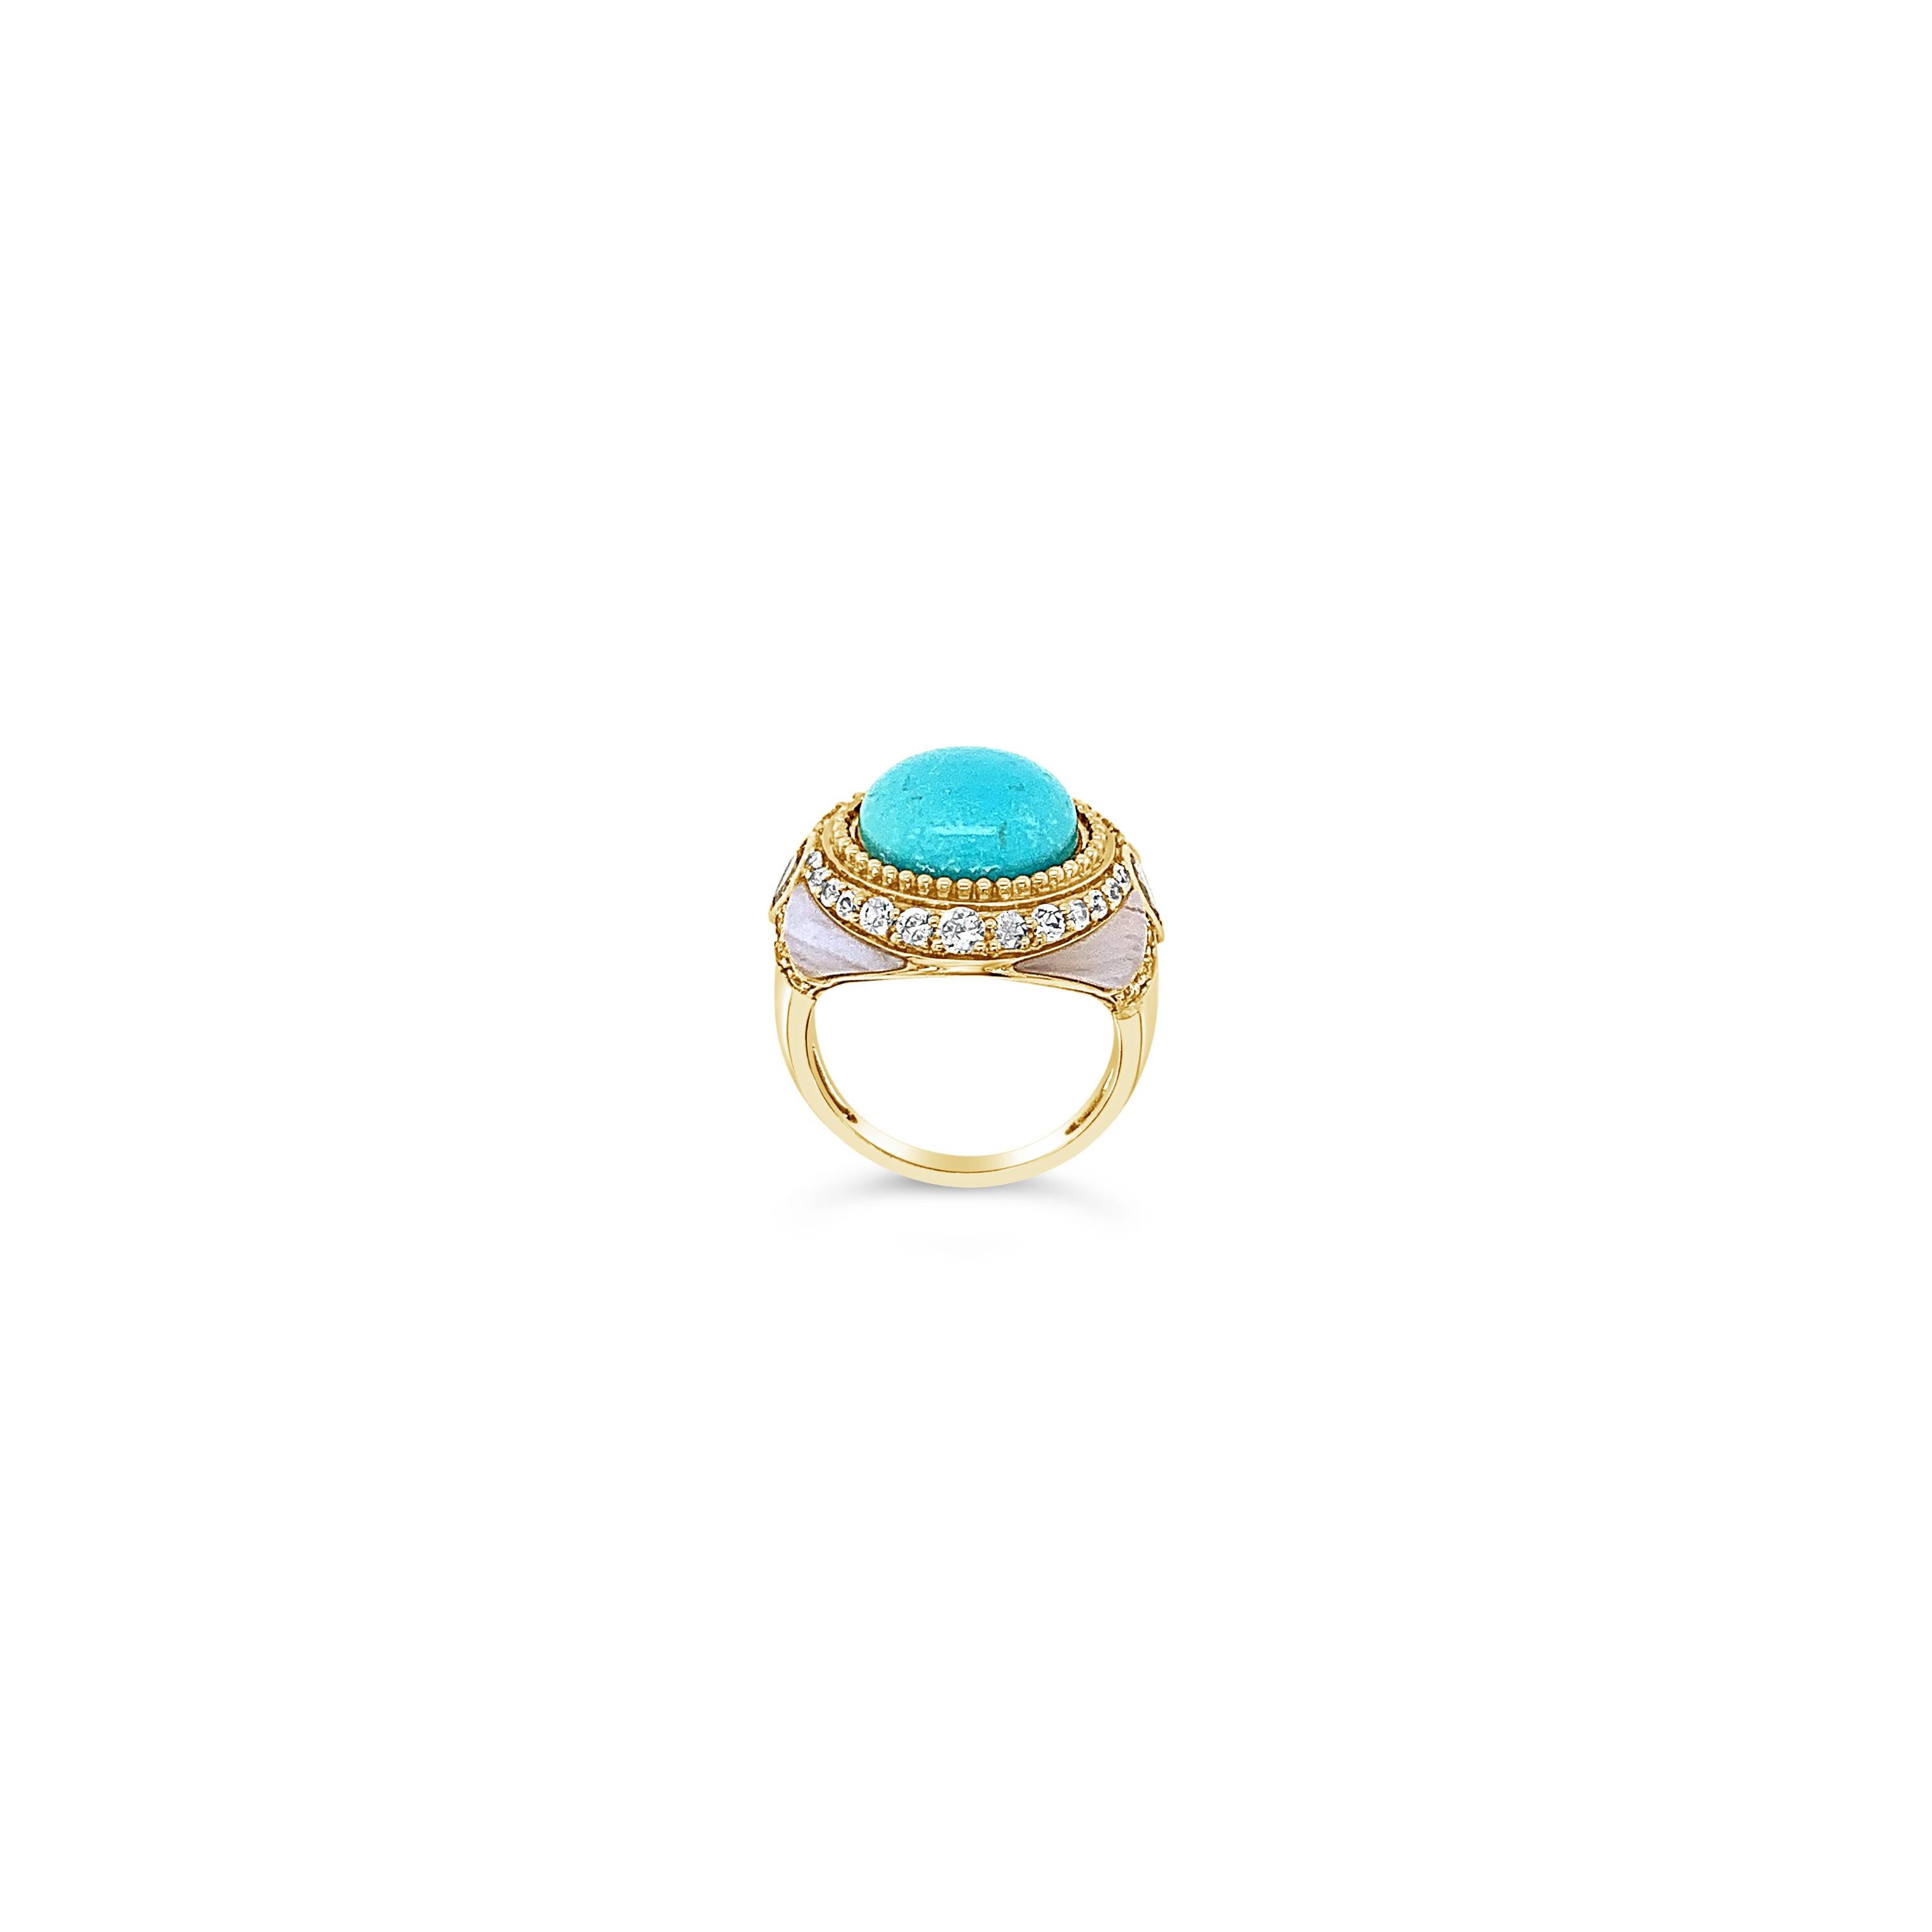 Carlo Viani® Ring featuring 3/8 cts. Blue Topaz, 3/4 cts. White Sapphire, Blue Agate, Robins Egg Blue Turquoise™,  set in 14K Honey Gold™

Diamonds Breakdown:
None

Gems Breakdown:
12mm Turquoise
7x5mm Blue Agate
3/4 cts White Sapphire
3/8 cts Blue